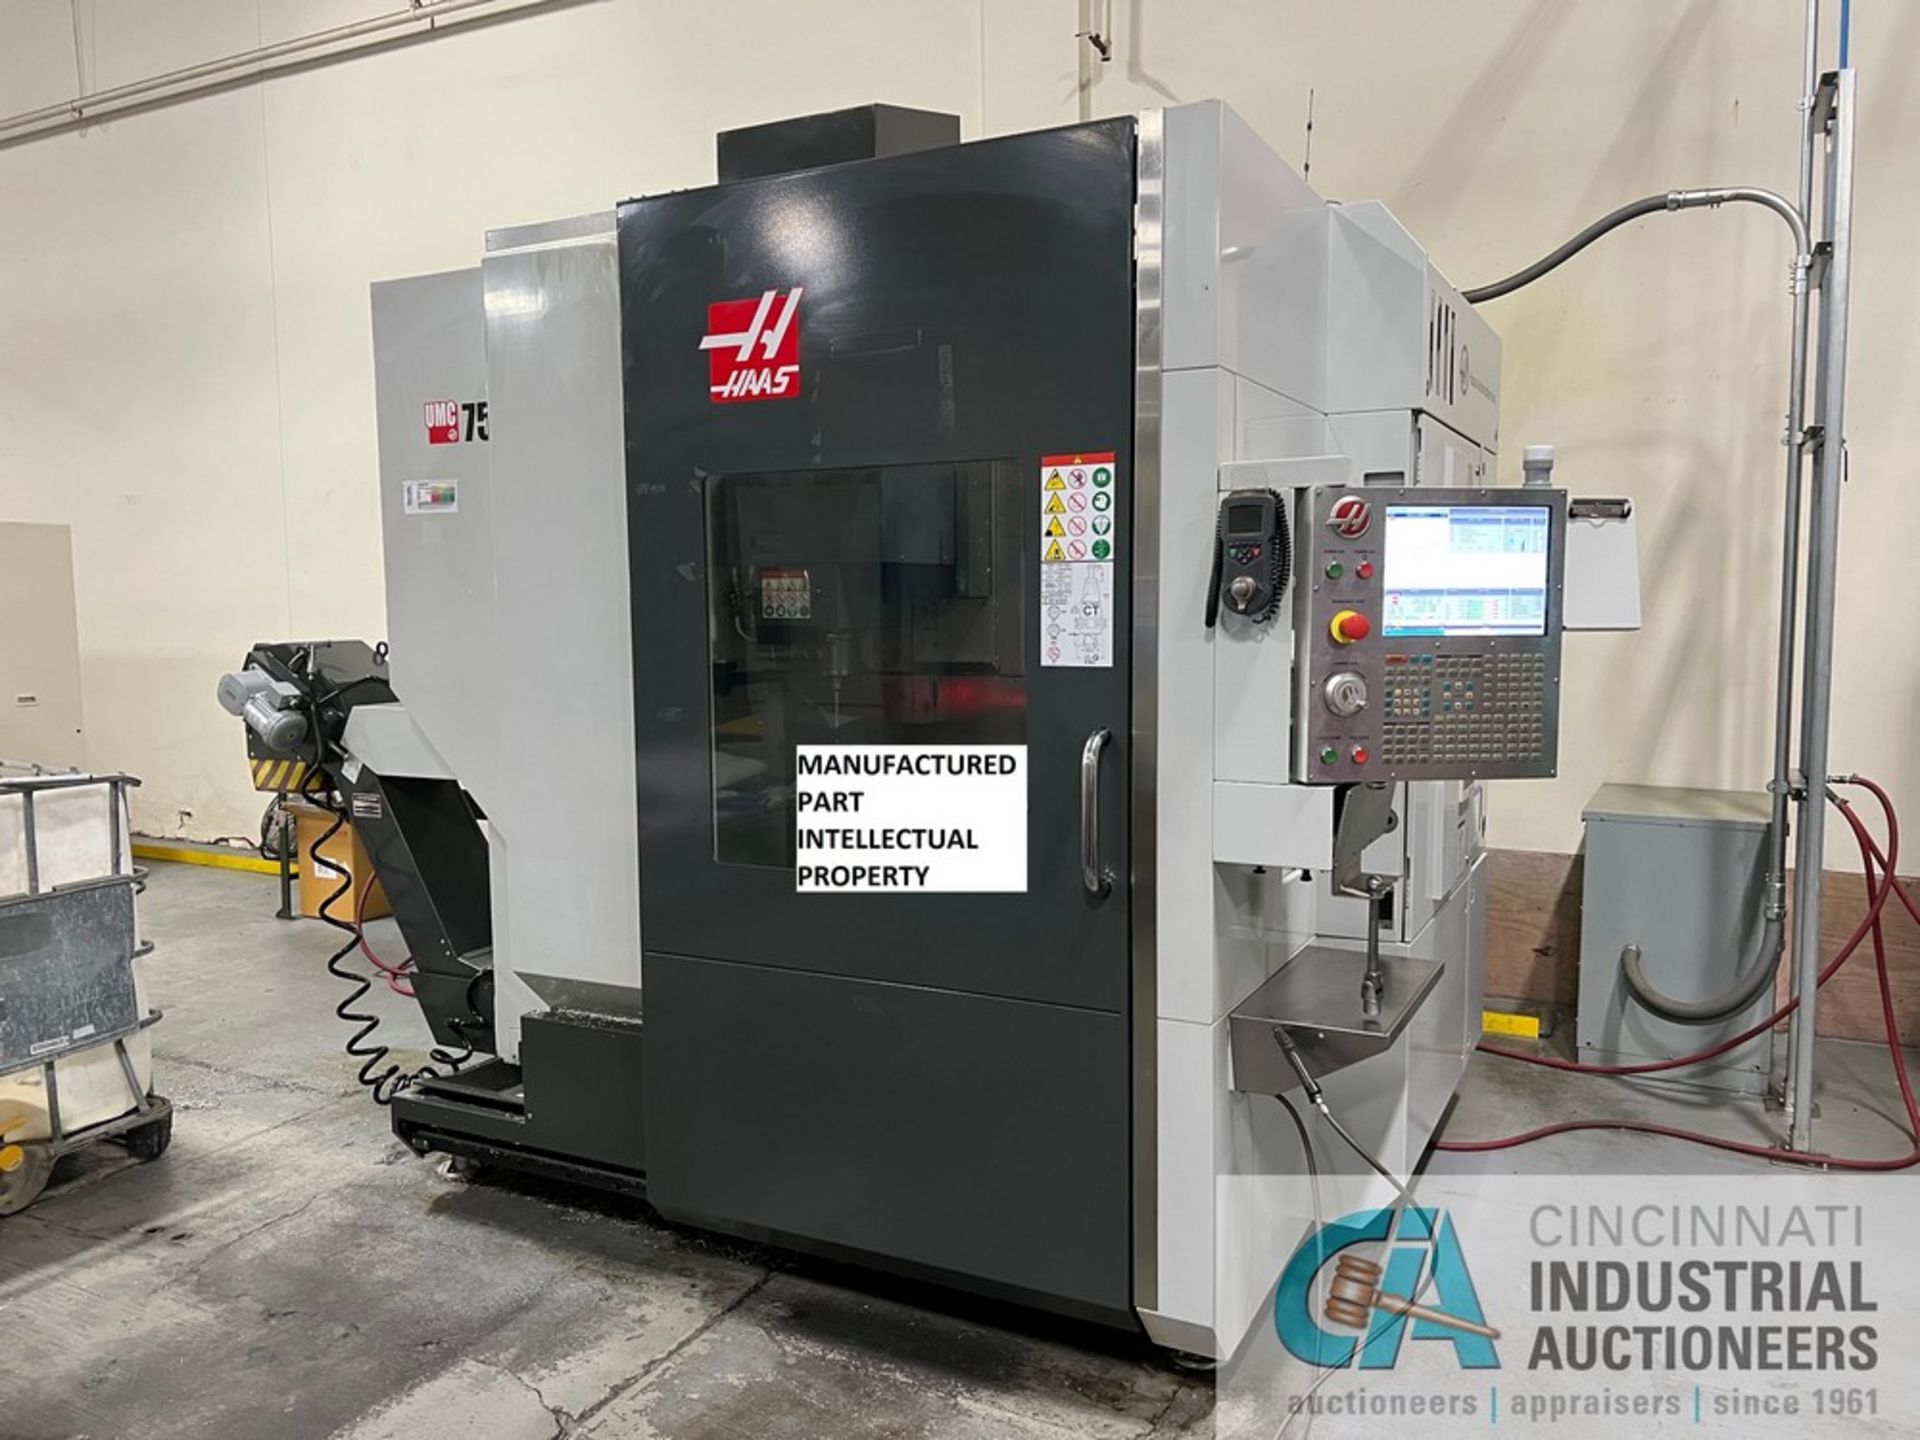 Haas Model UMC-750 Five-Axis CNC Universal Machining Center (2017) 6,578 Cutting Hours Showing - Image 5 of 19